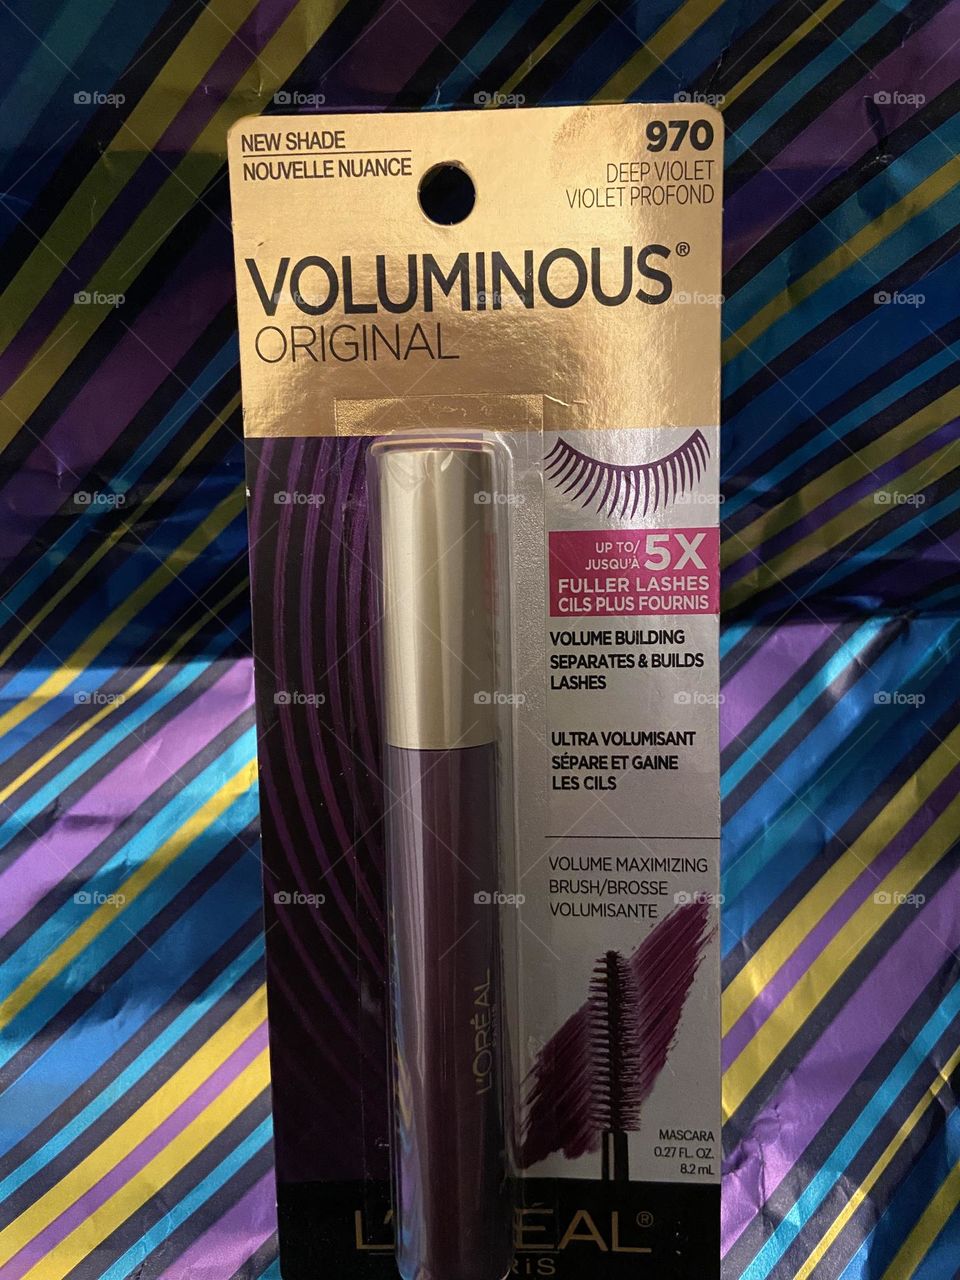 L’Oréal Voluminous Mascara in Deep Violet against a shimmery striped background in various jewel tones that compliment the product nicely. 